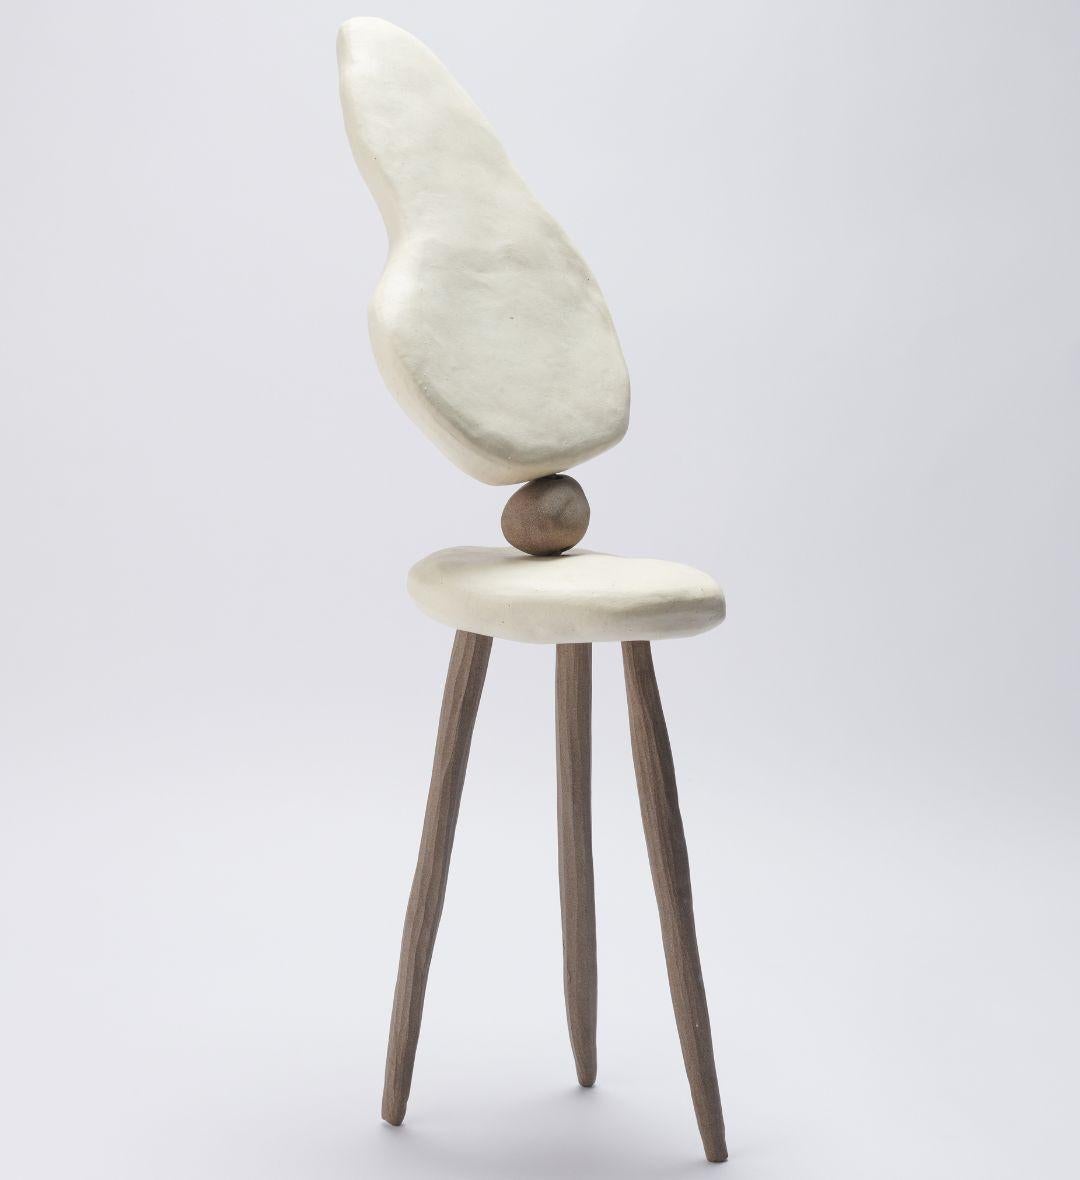 Other Balance 01 Sculpture by Joana Kieppe For Sale